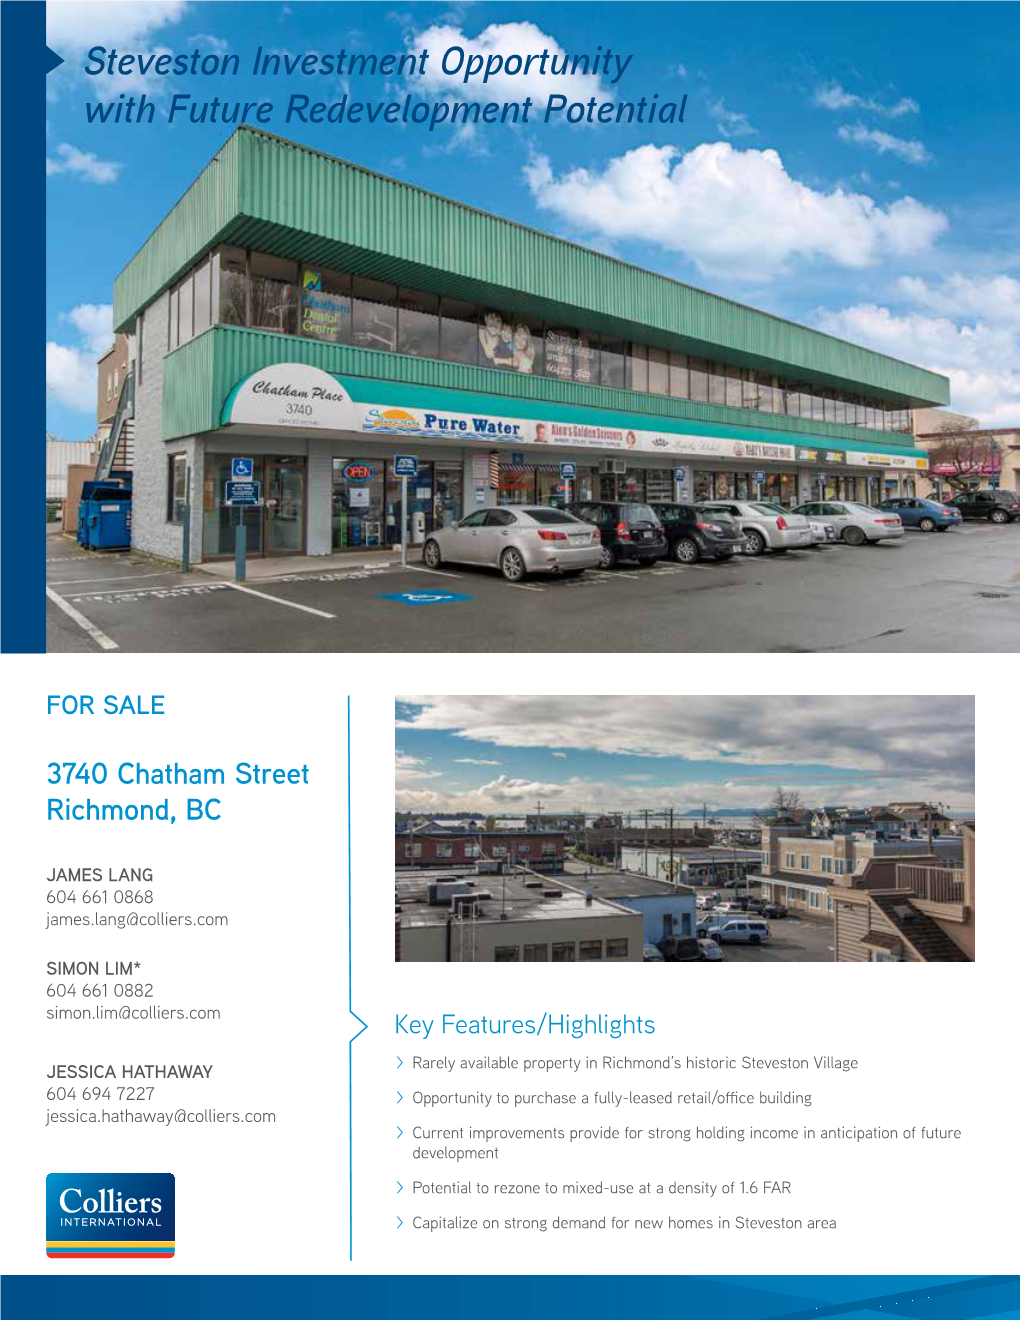 Steveston Investment Opportunity with Future Redevelopment Potential